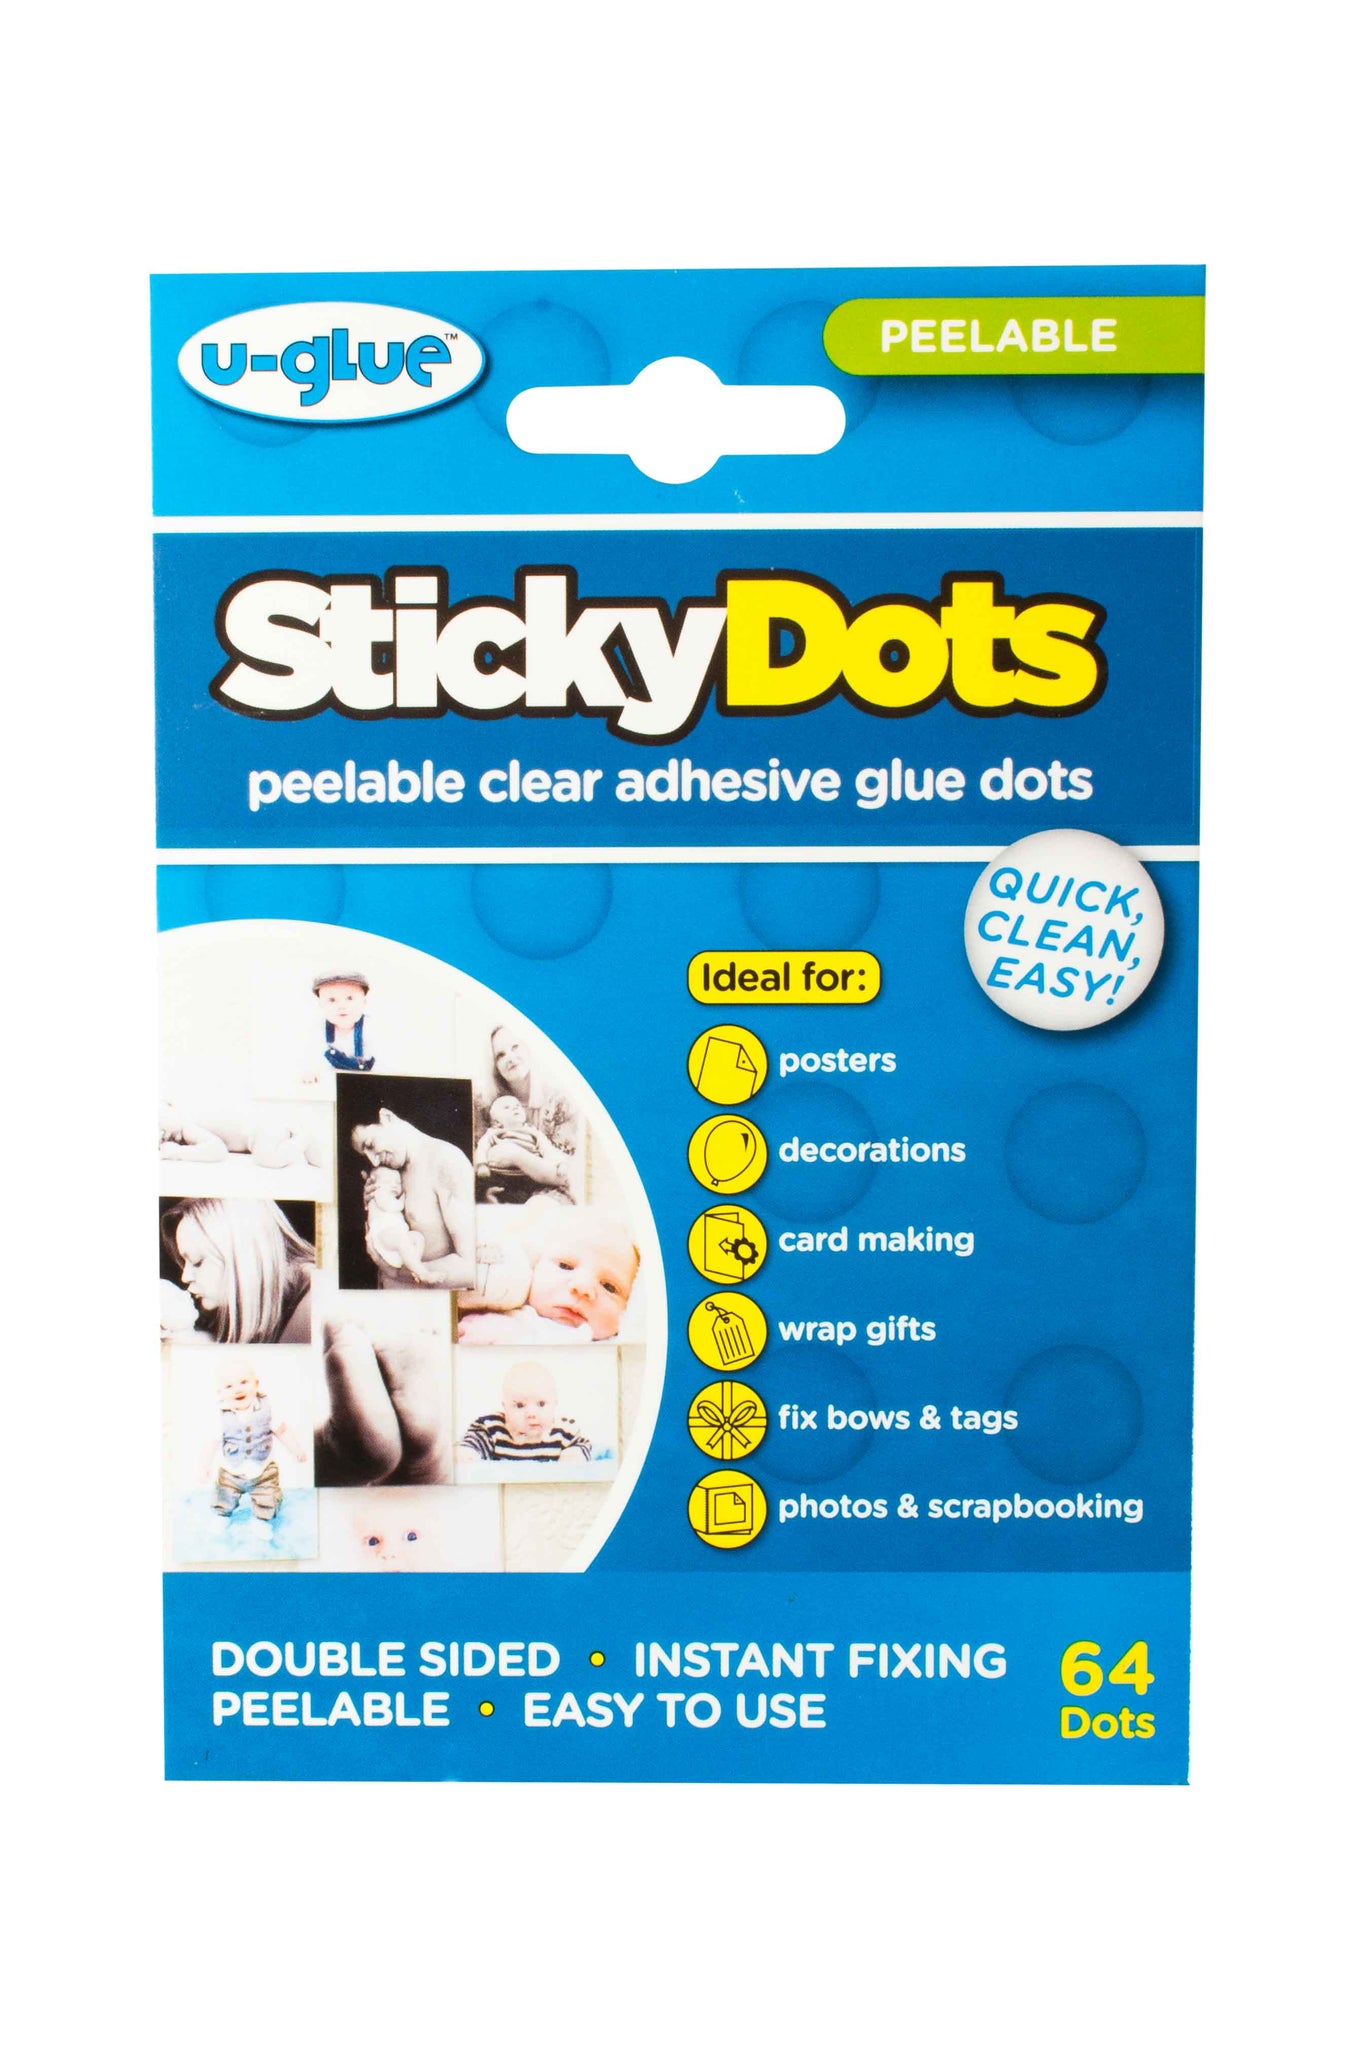 Scrapbook Glue Dots - 96 x thin, permanent dots on perforated sheets –  Allthingssticky